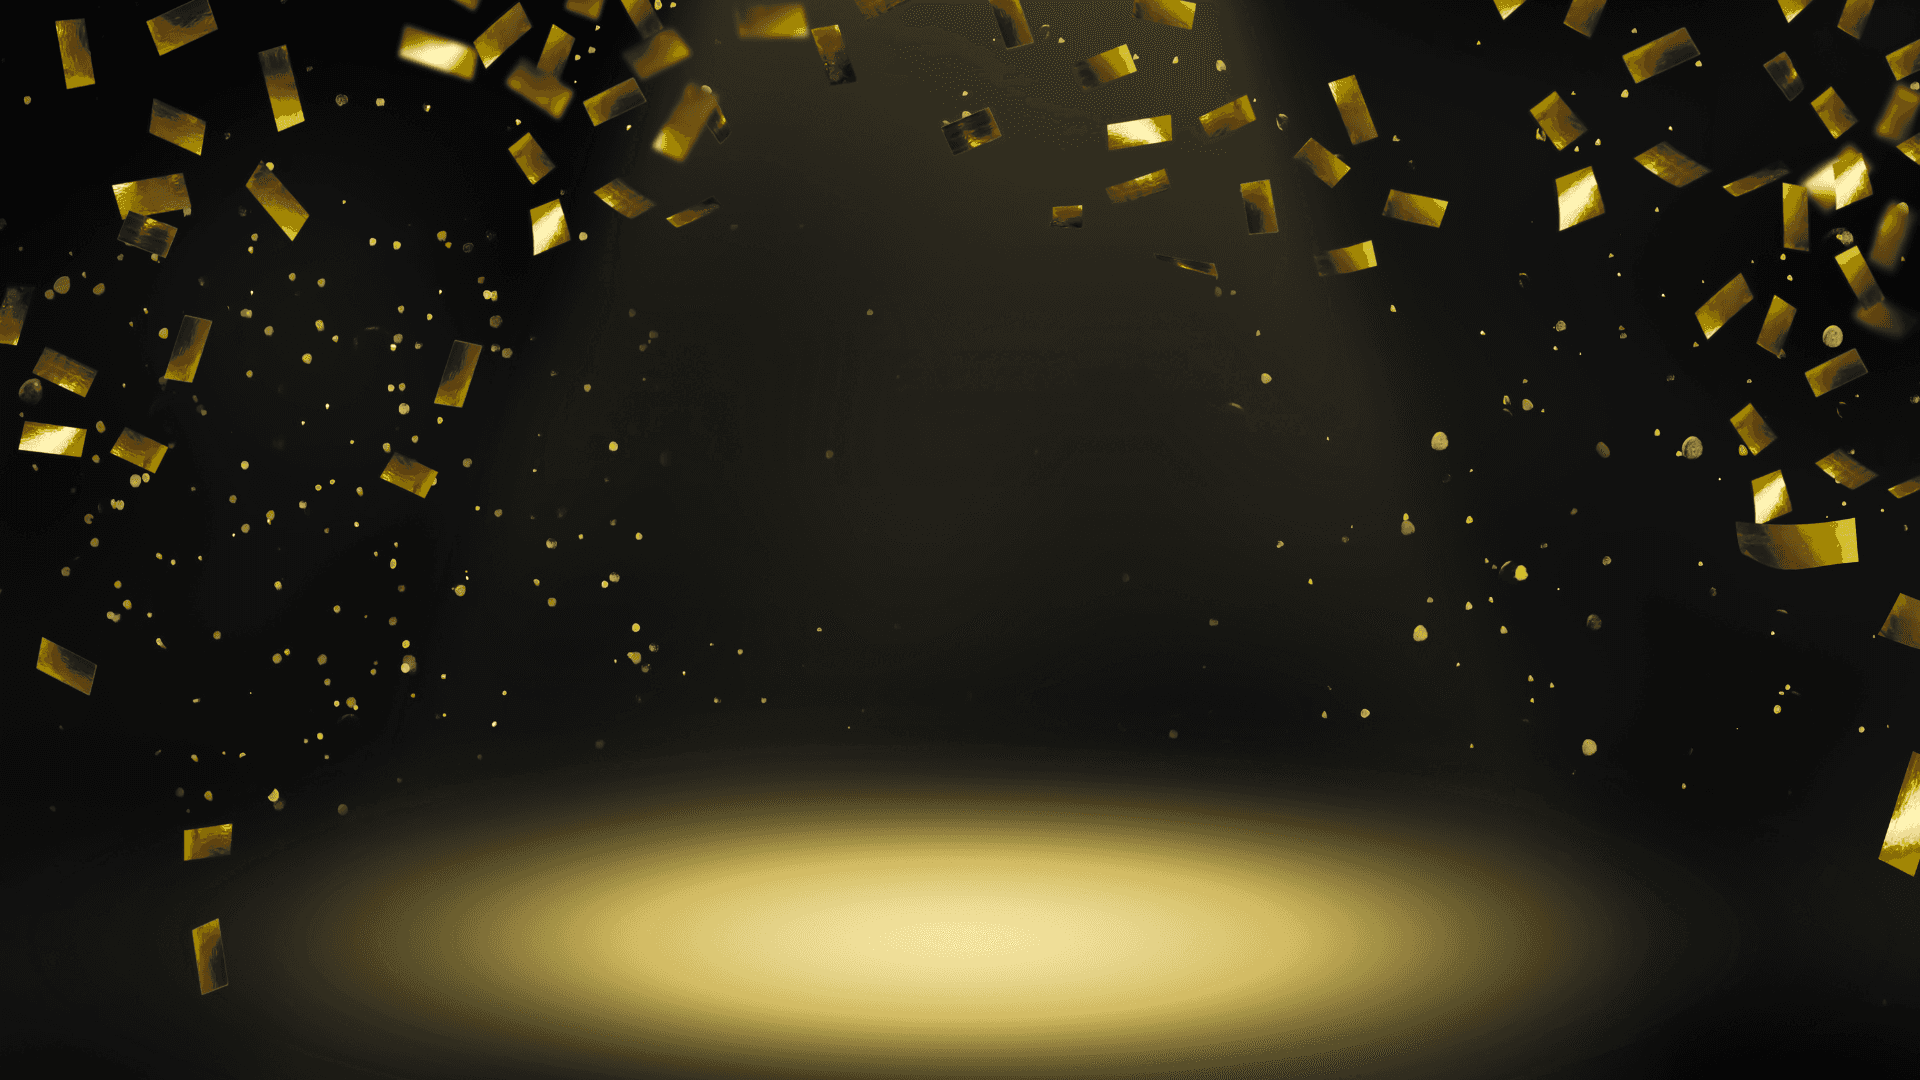 Golden Confetti Falling On A Black Background